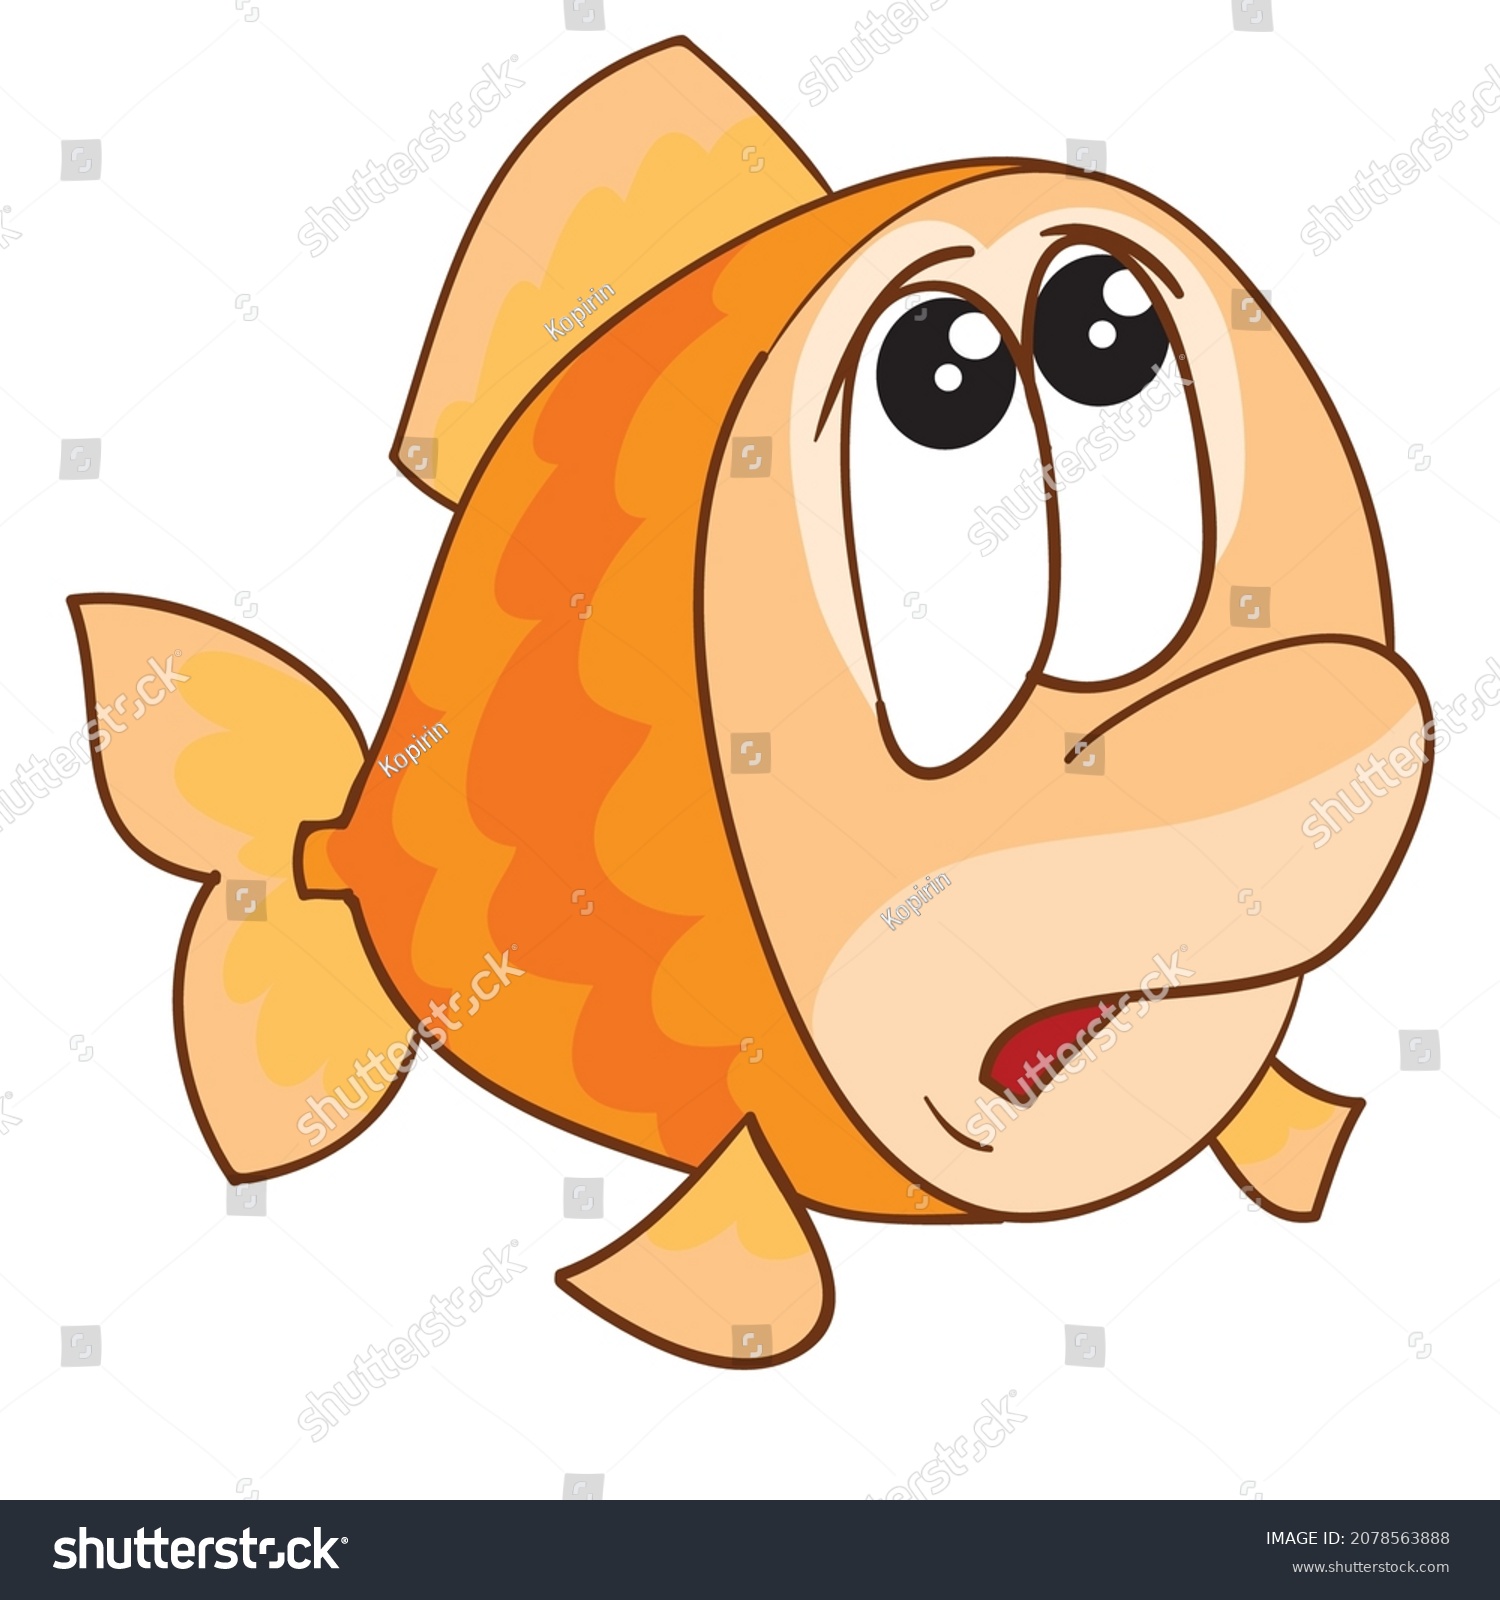 2,991 Scared fish Images, Stock Photos & Vectors Shutterstock